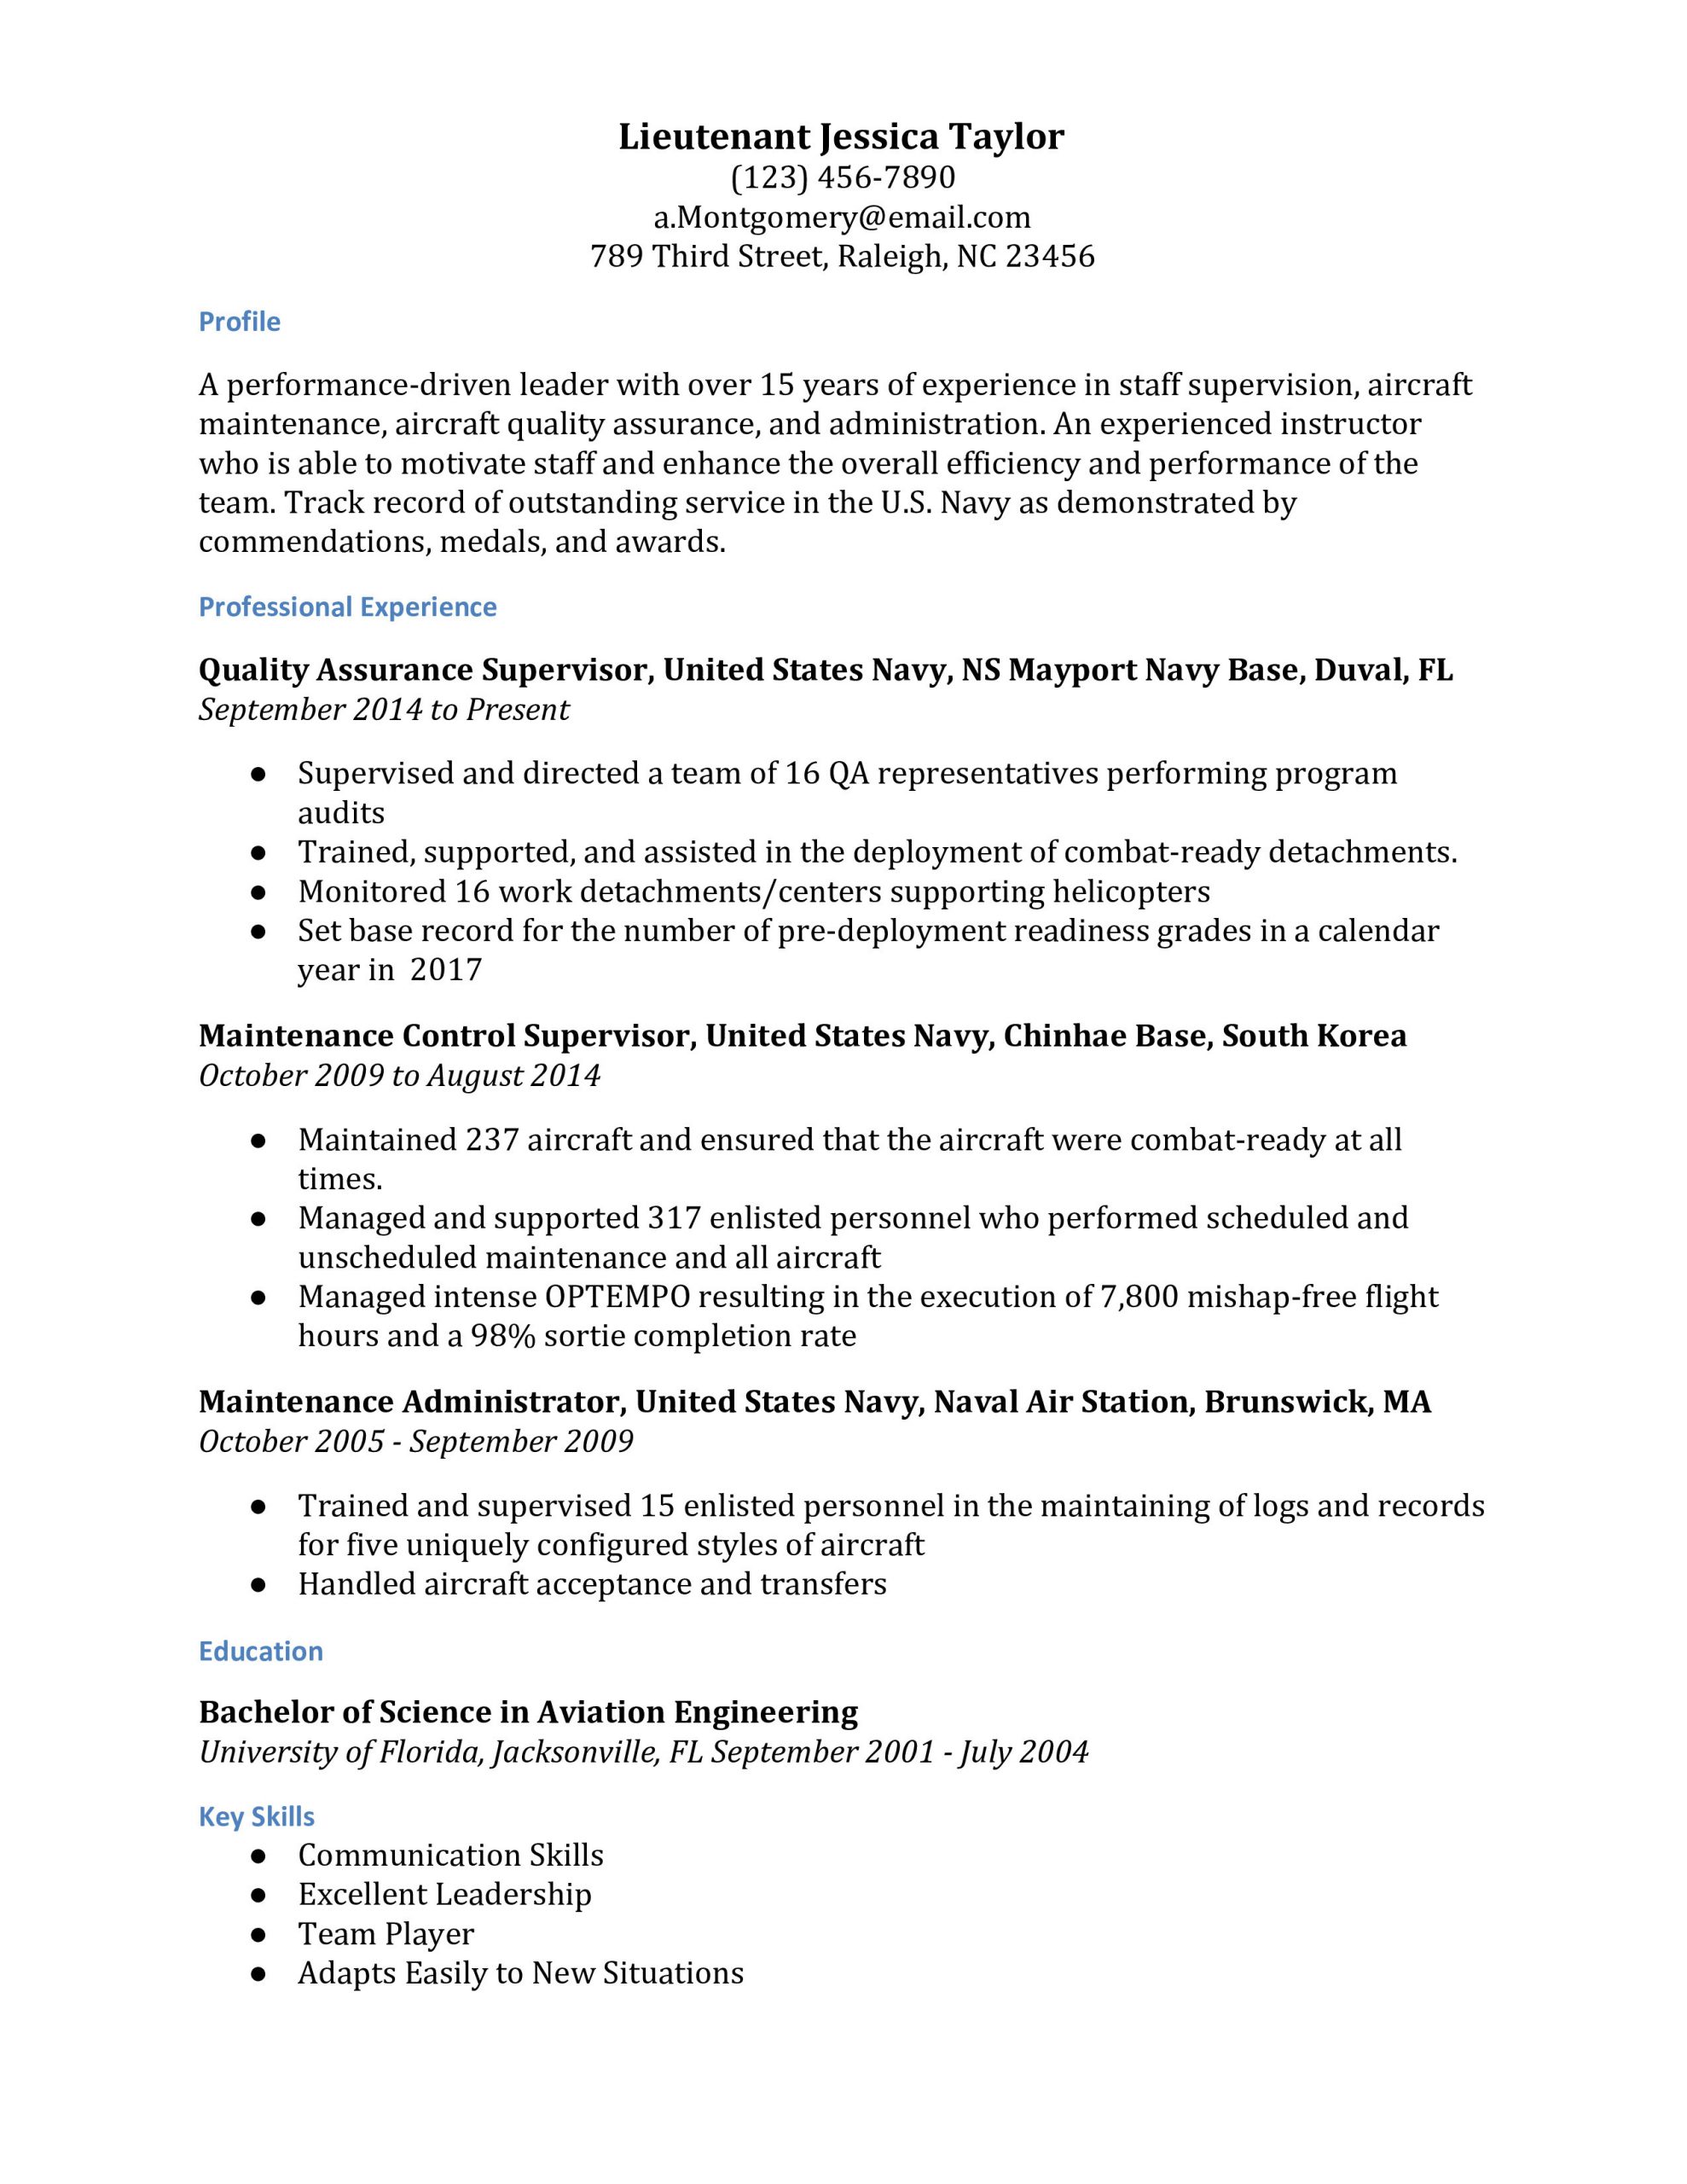 Resume Template for Military to Civilian Military-to-civilian Resume Examples – Resumebuilder.com